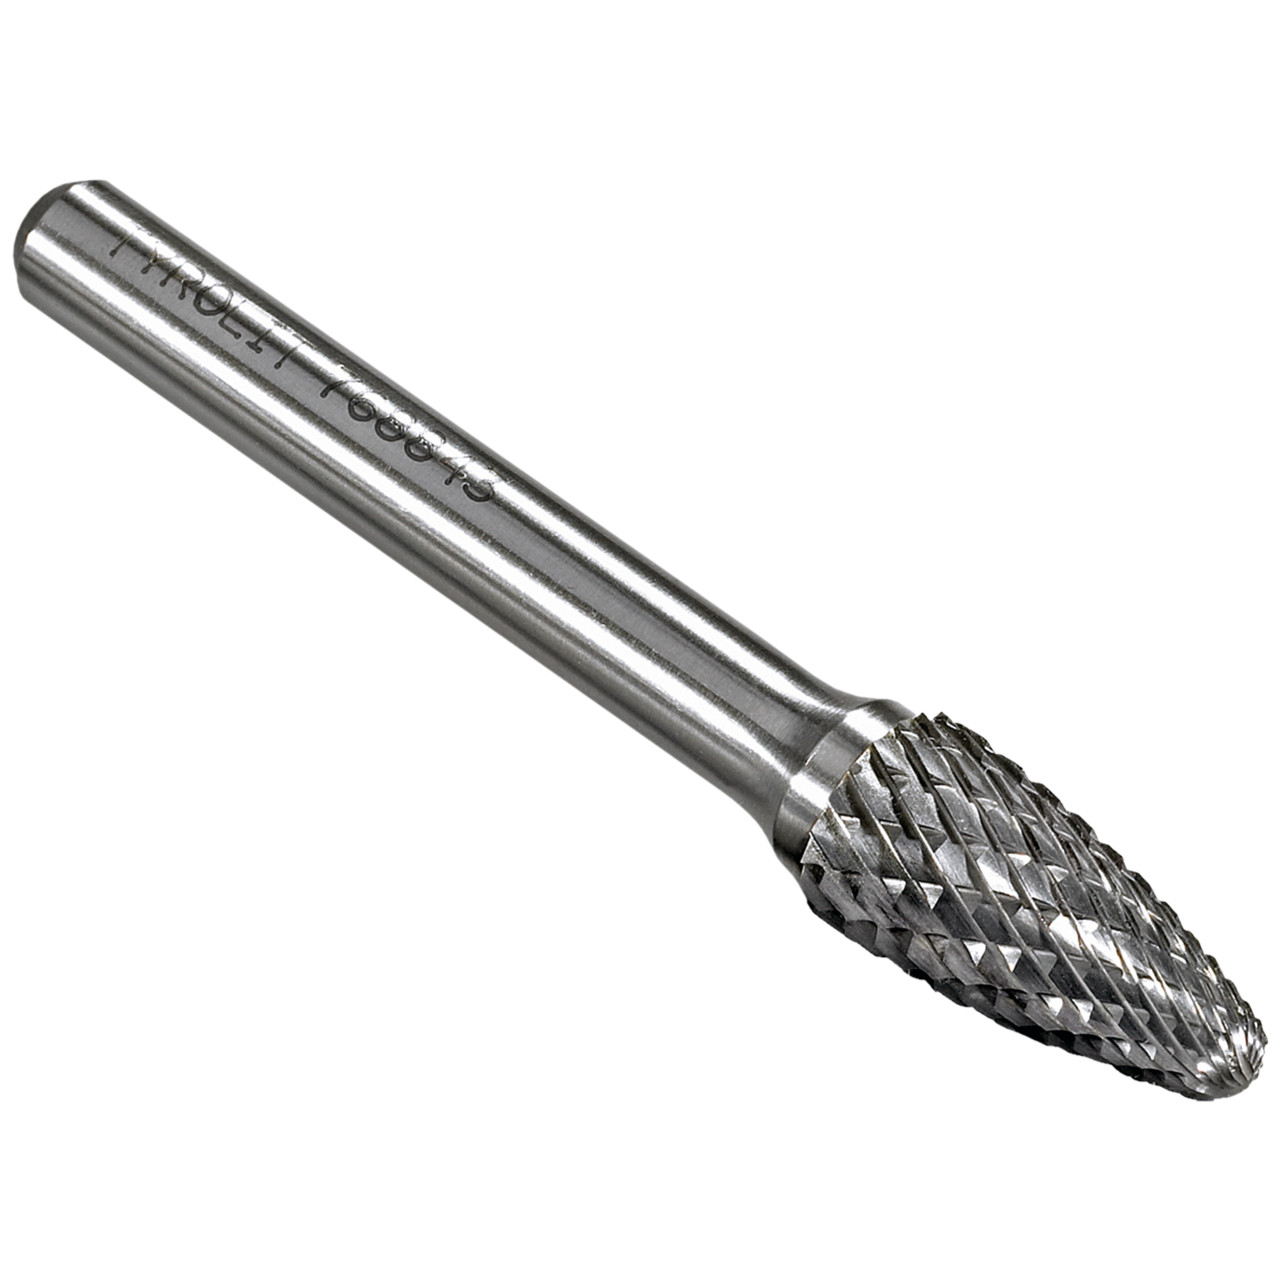 TYROLIT carbide end mill DxT-SxL 10x19-6x65 For cast iron, steel and stainless steel, shape: 52RBF - tree, Art. 768843